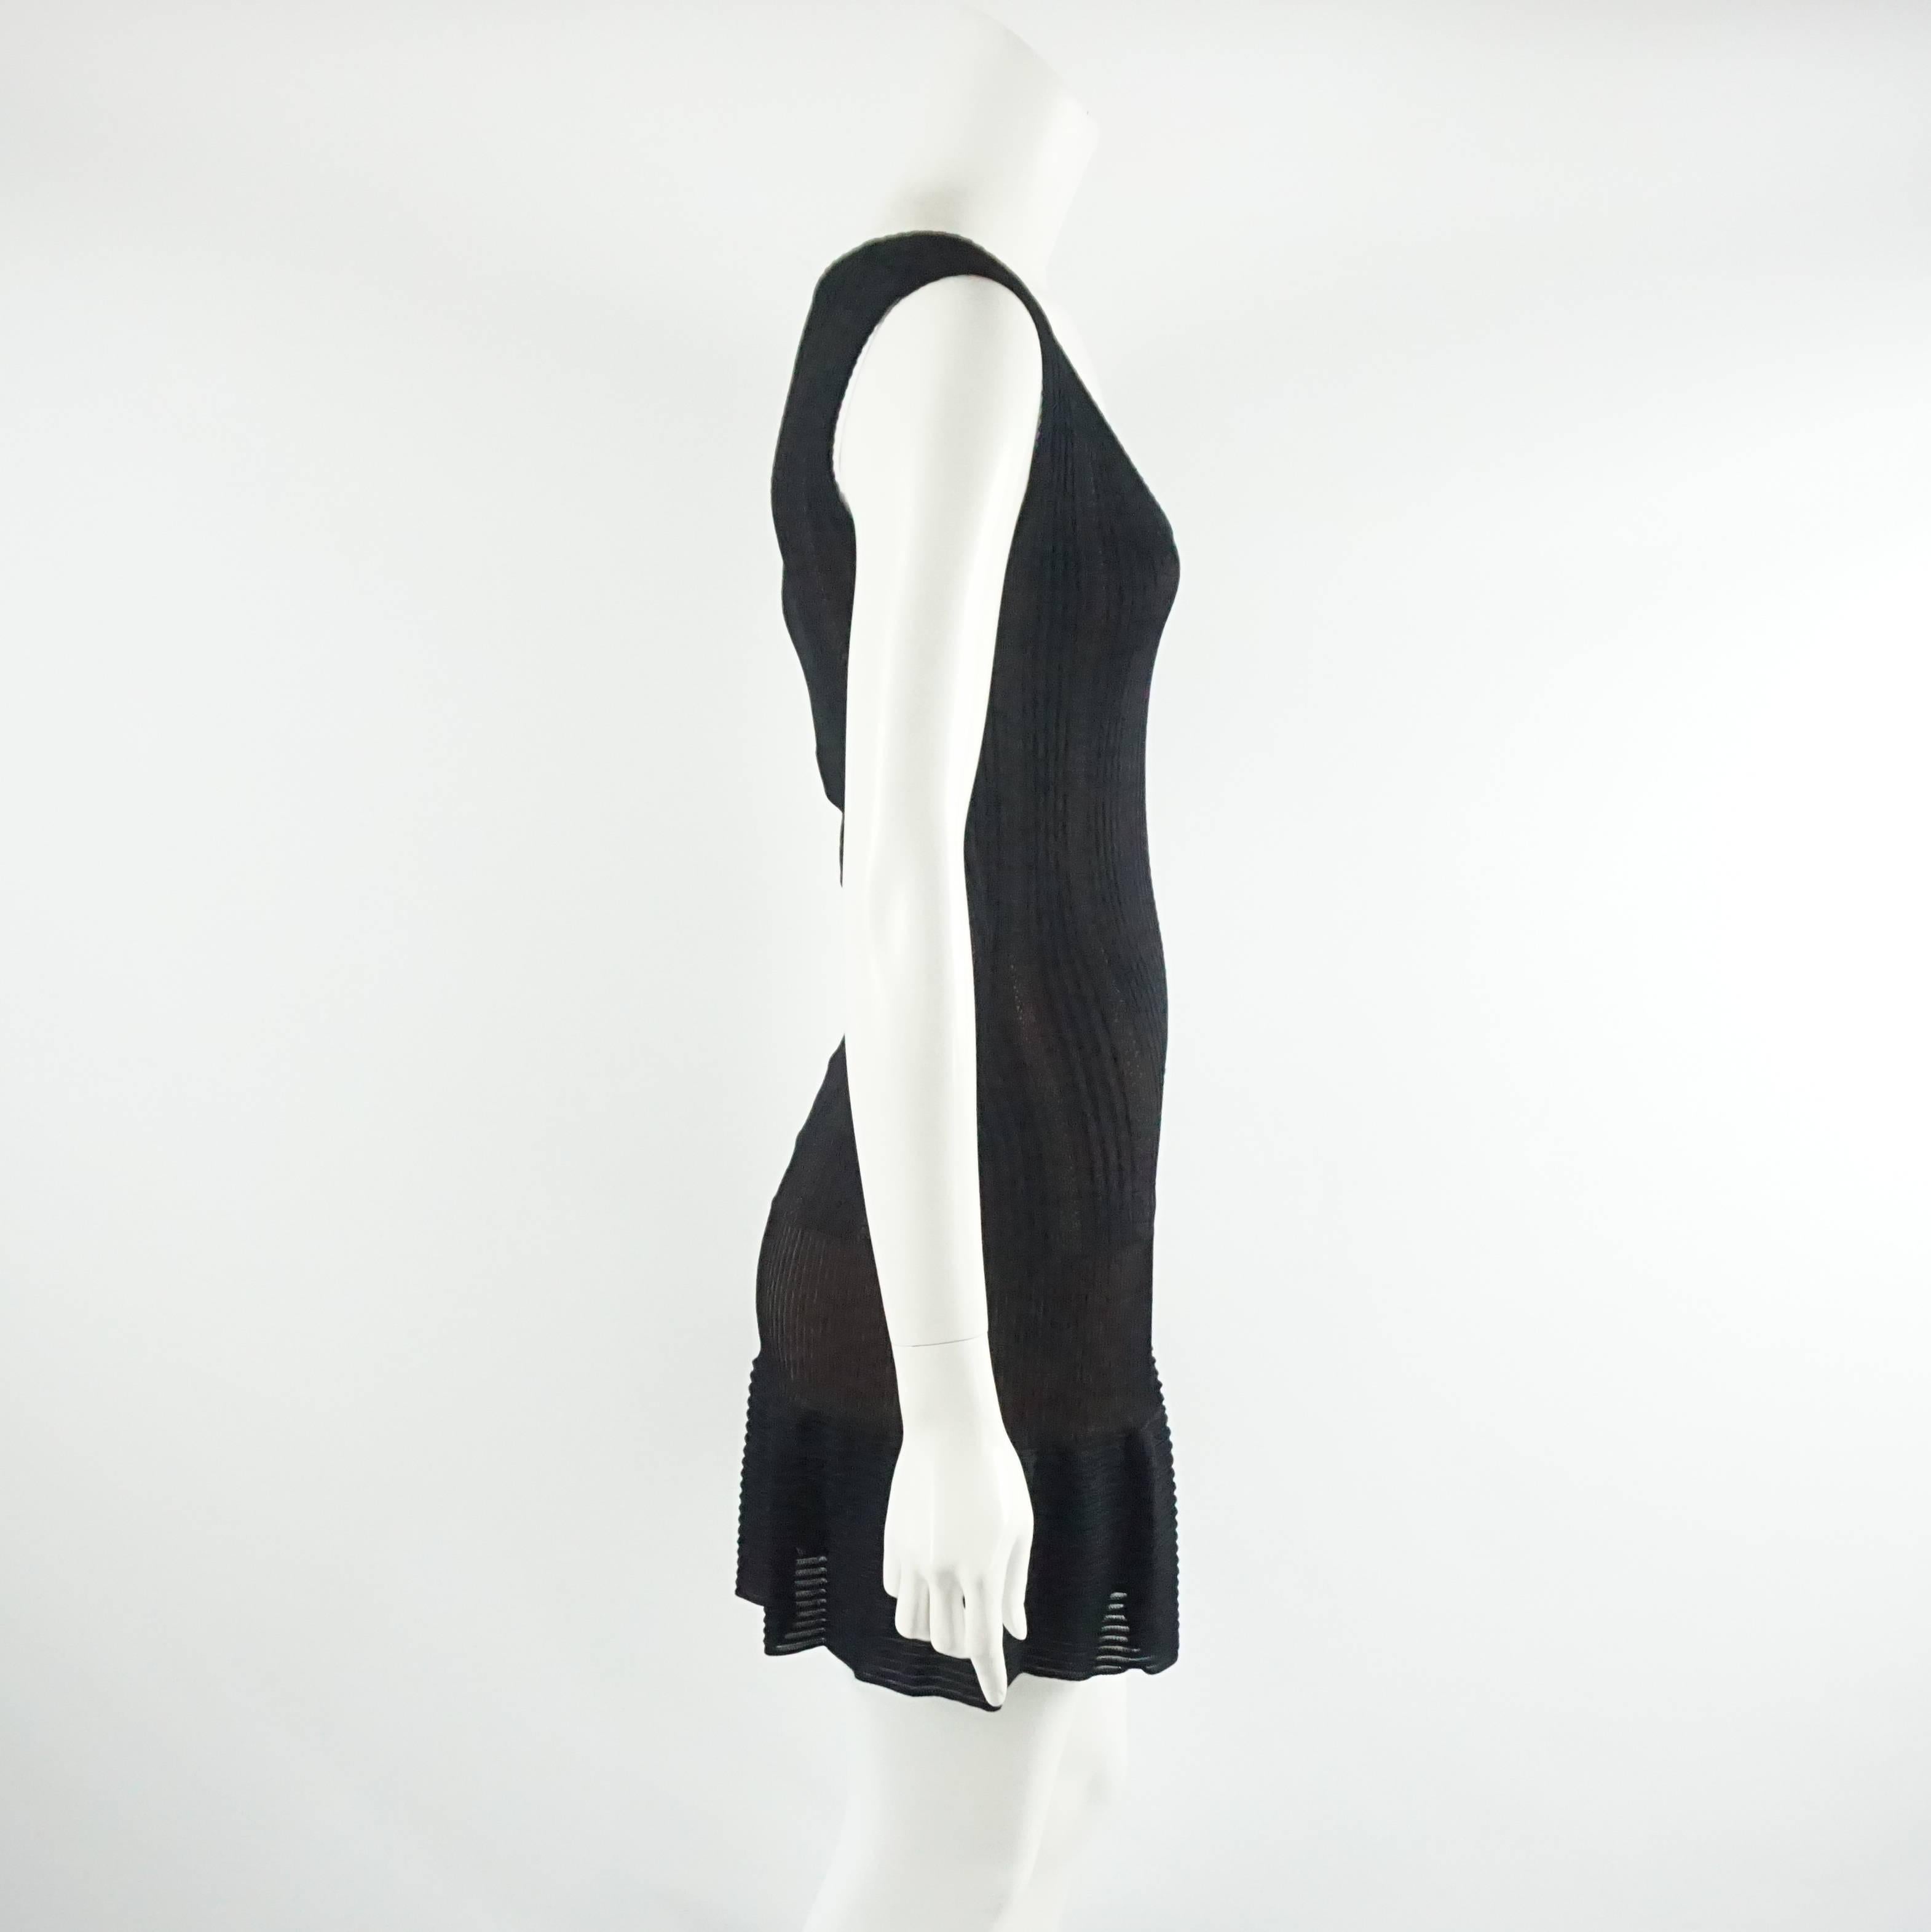 This stunning Azzedine Alaia black knit dress is made of viscose rayon. It is sleeveless with a nude lining and bottom ruffle. The dress is excellent condition with minimal wear. Size XS, circa 2000's. 

Measurements
Shoulder to Shoulder: 15